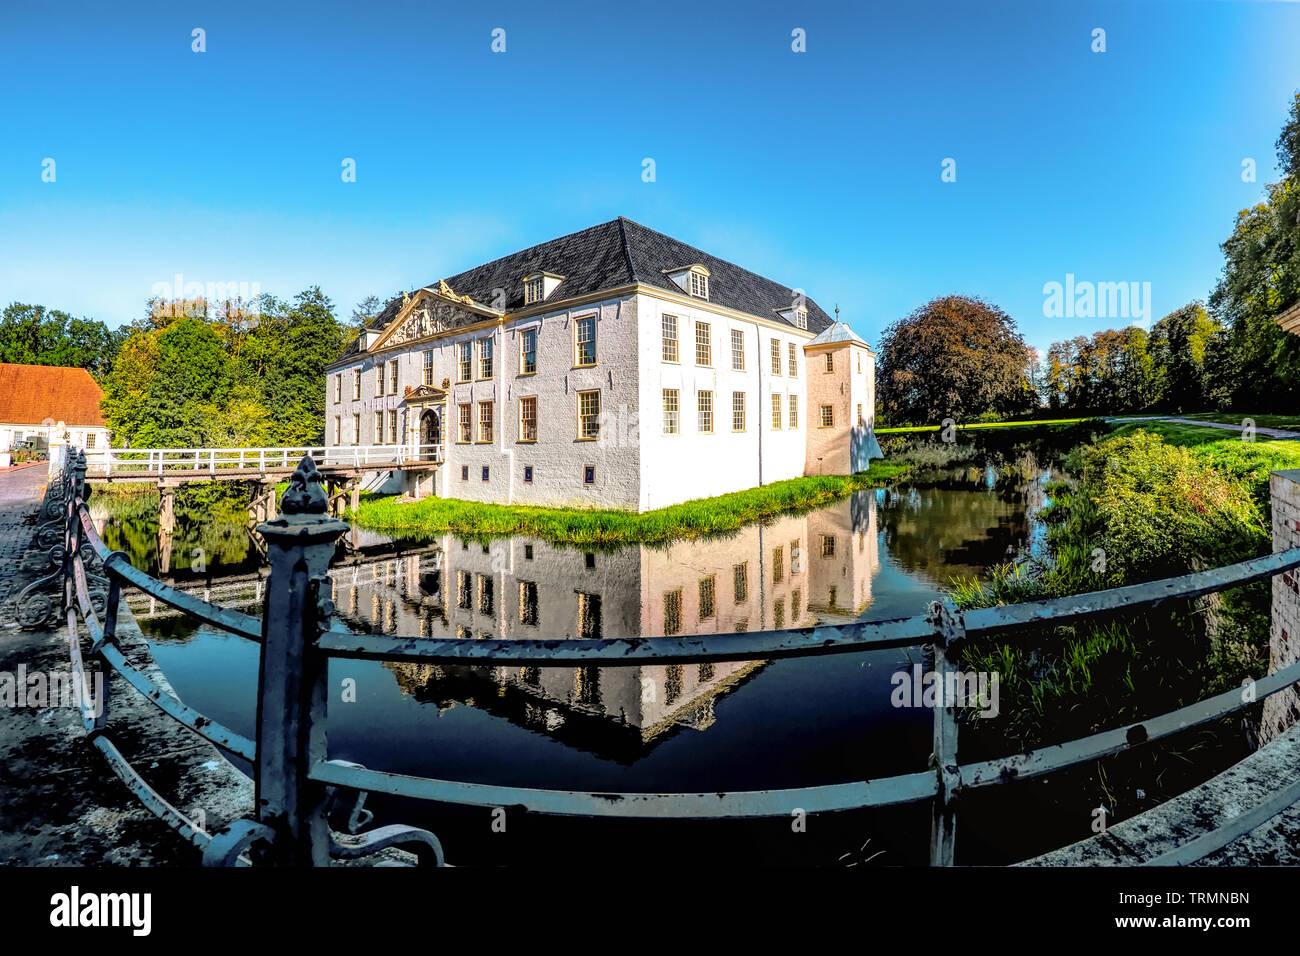 Dornum, Germany, 09/30/2015: The historic Norderburg castle in Dornum in the state of Lower Saxony. The water castle is surrounded by a water ditch. I Stock Photo